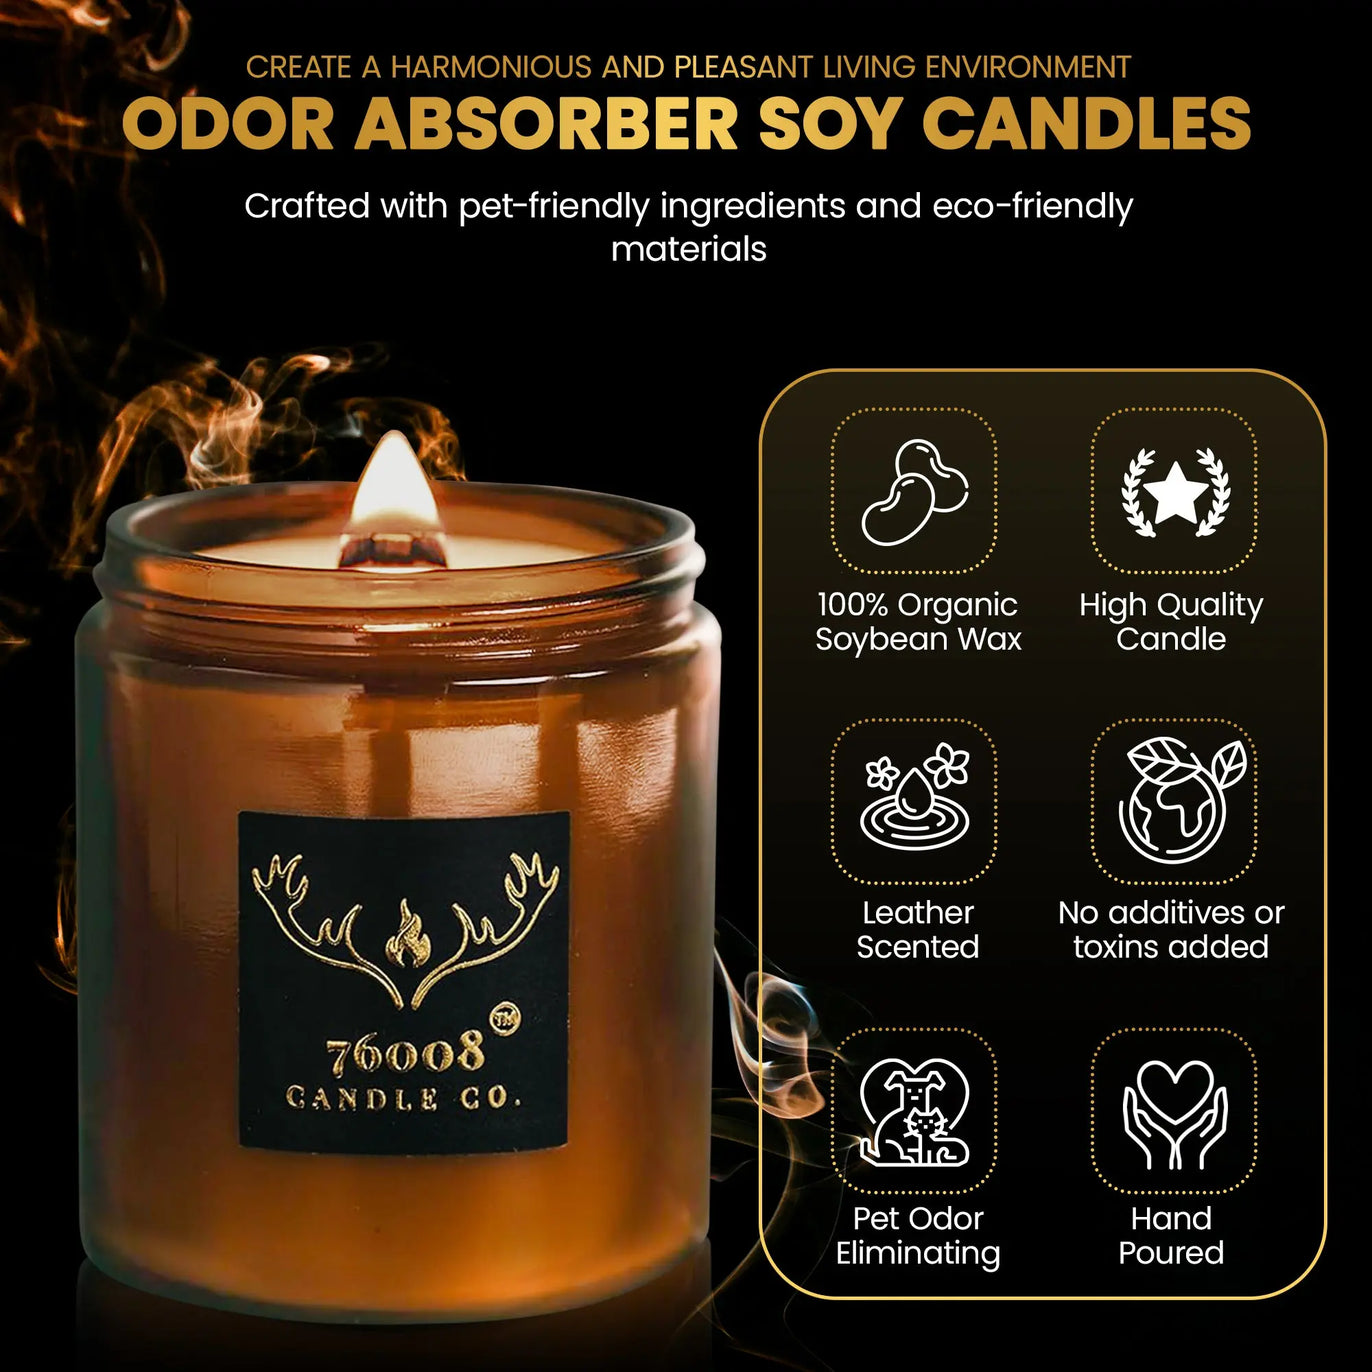 Leather Scented Candle | Man Cave Decor  | Candles for Men | Gifts for Him or Her 76008 Candle Co.